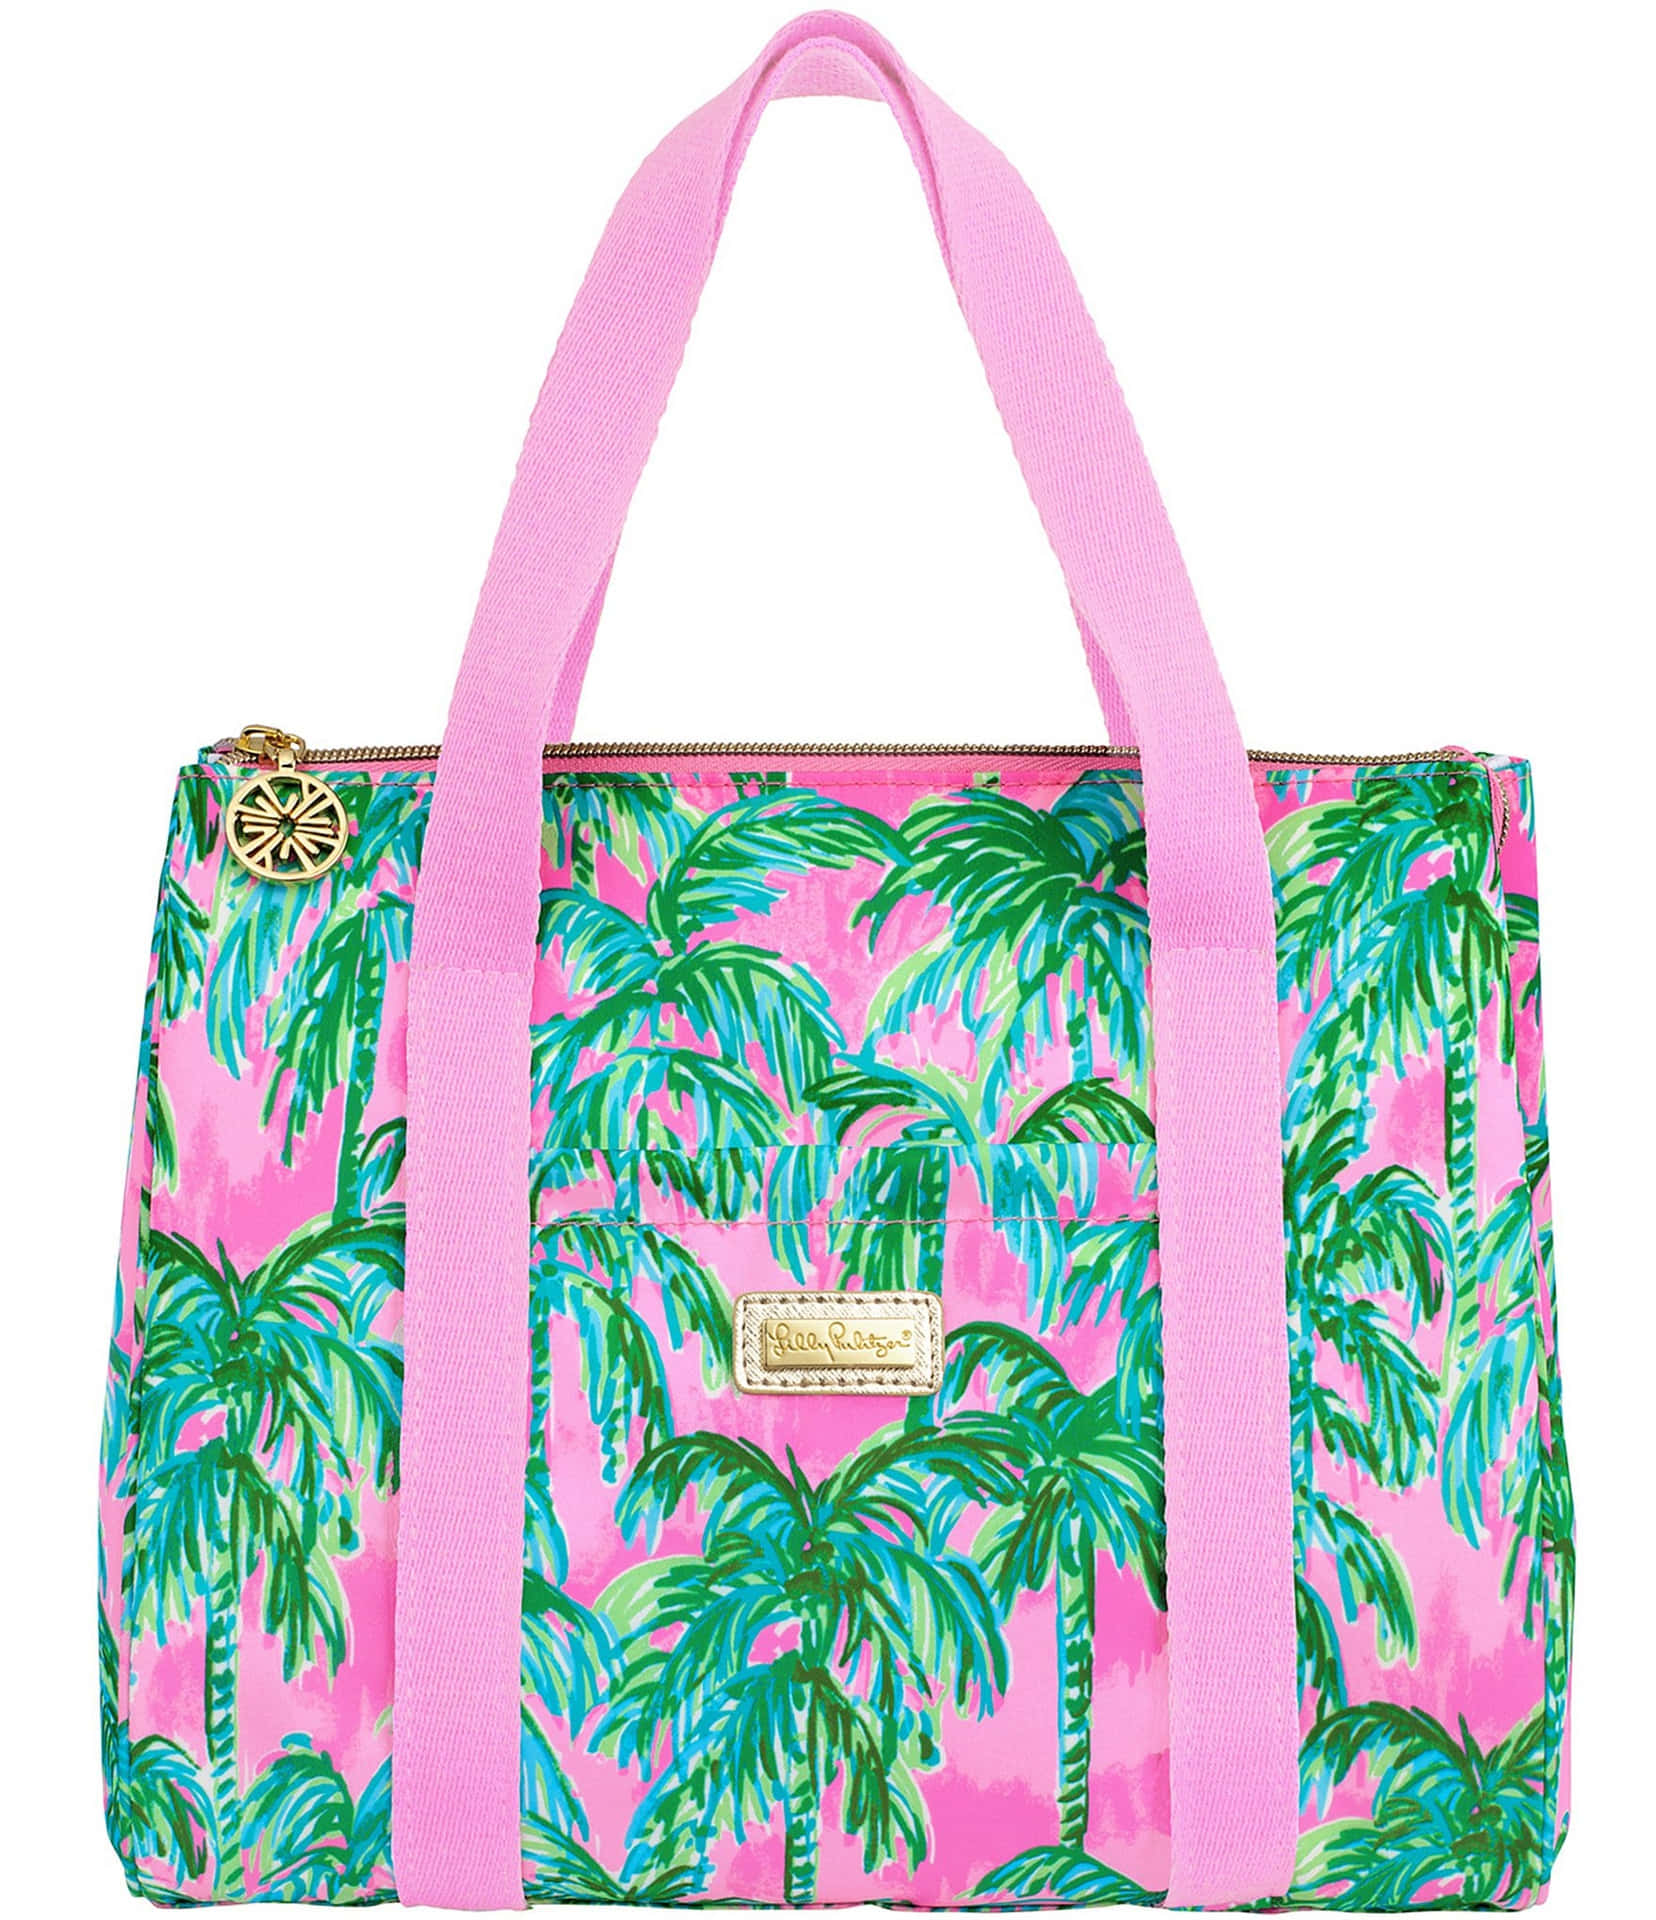 Lilly Pulitzer Palm Print Tote Bag